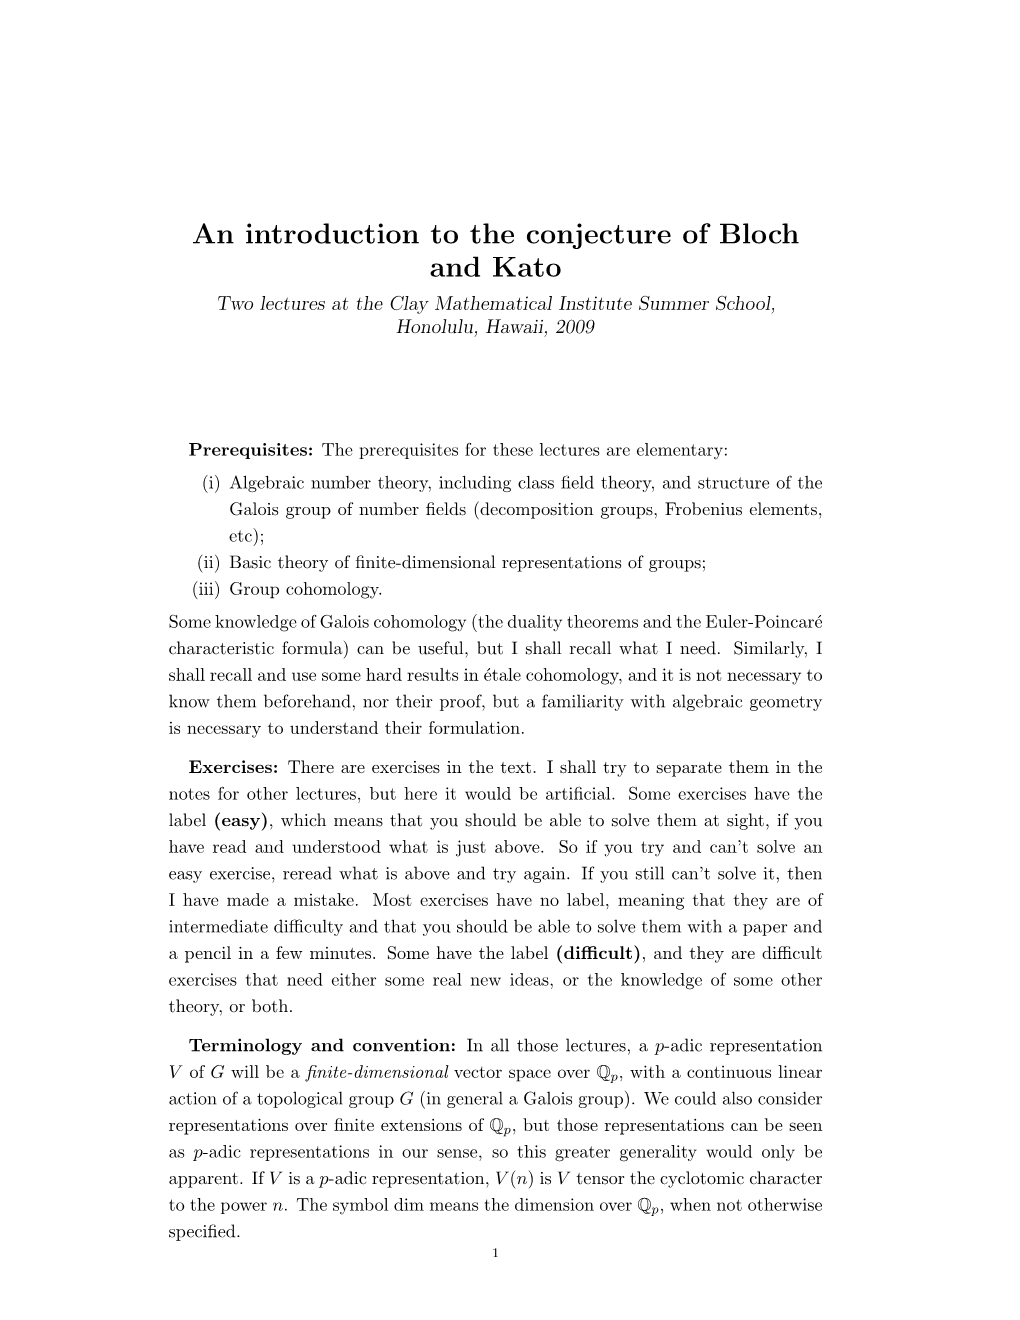 An Introduction to the Conjecture of Bloch and Kato Two Lectures at the Clay Mathematical Institute Summer School, Honolulu, Hawaii, 2009